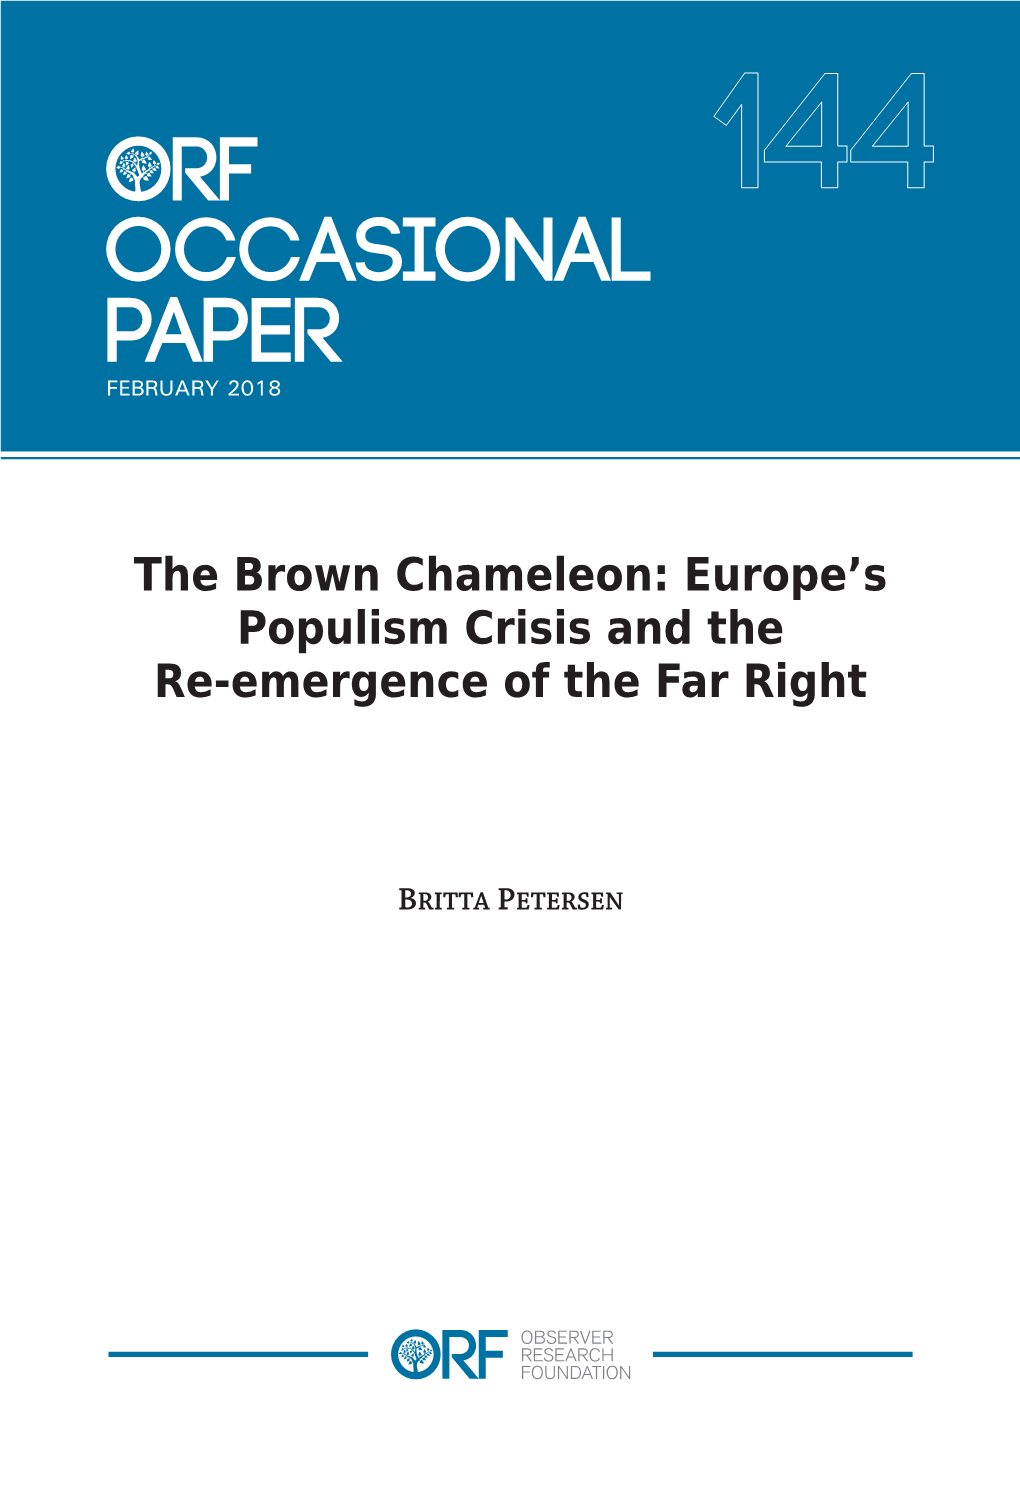 The Brown Chameleon: Europe's Populism Crisis and the Re